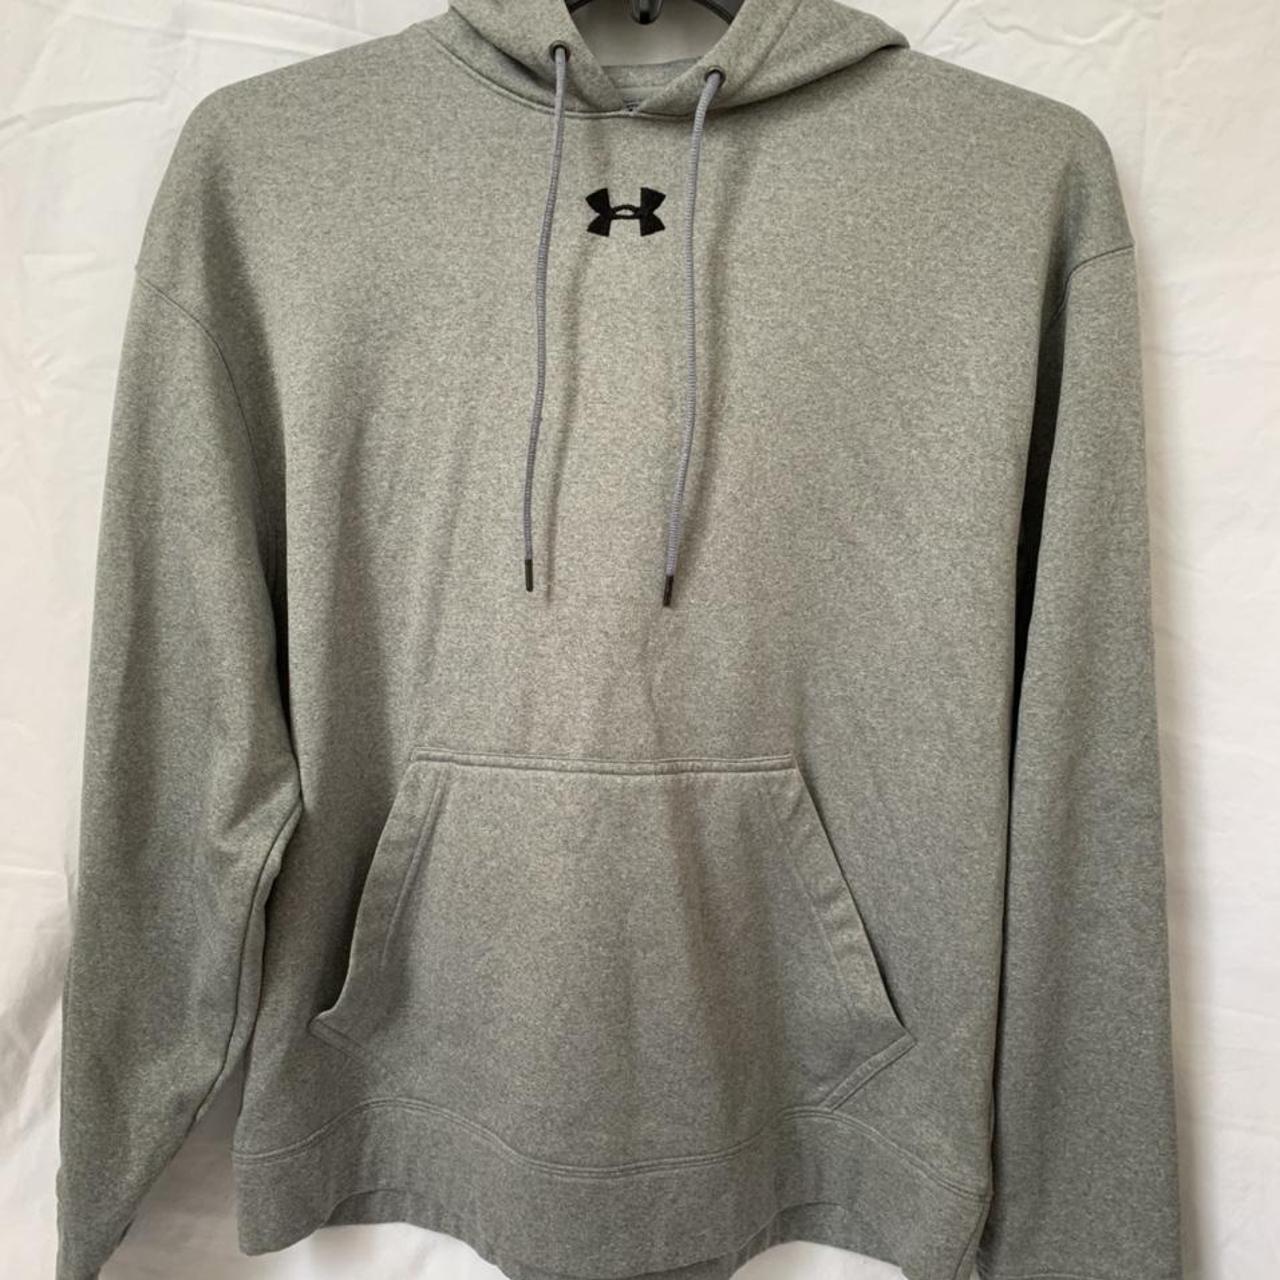 Underarmour Men’s Gray Loose Style Dry-fit... - Depop